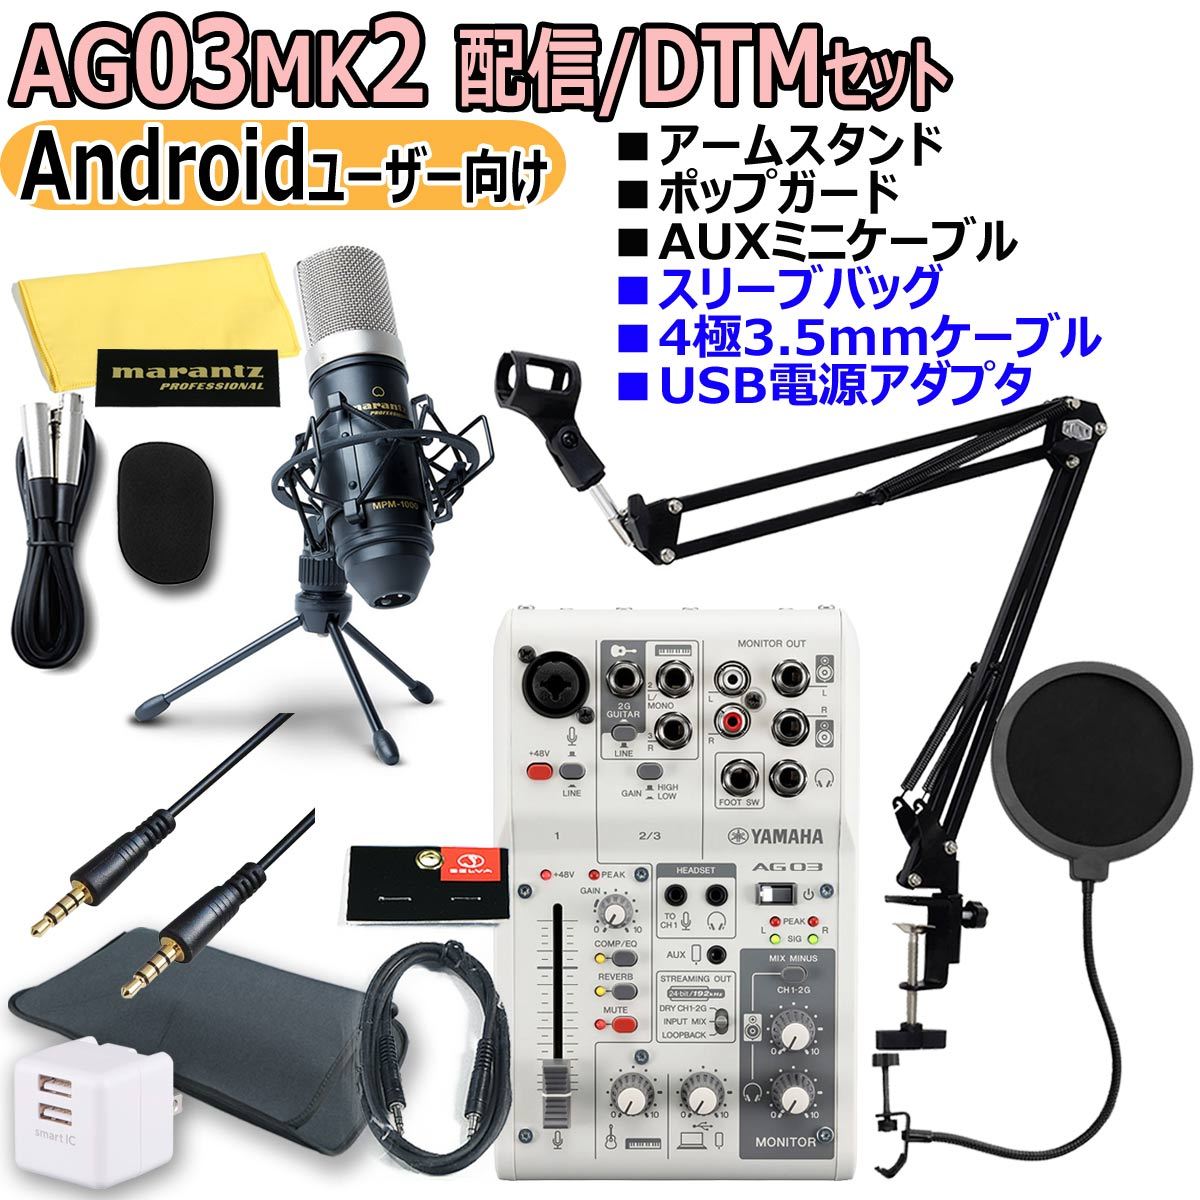 YAMAHA AG03MK2 WHITE Androidユーザー向け 配信/DTMセット【WEBSHOP ...